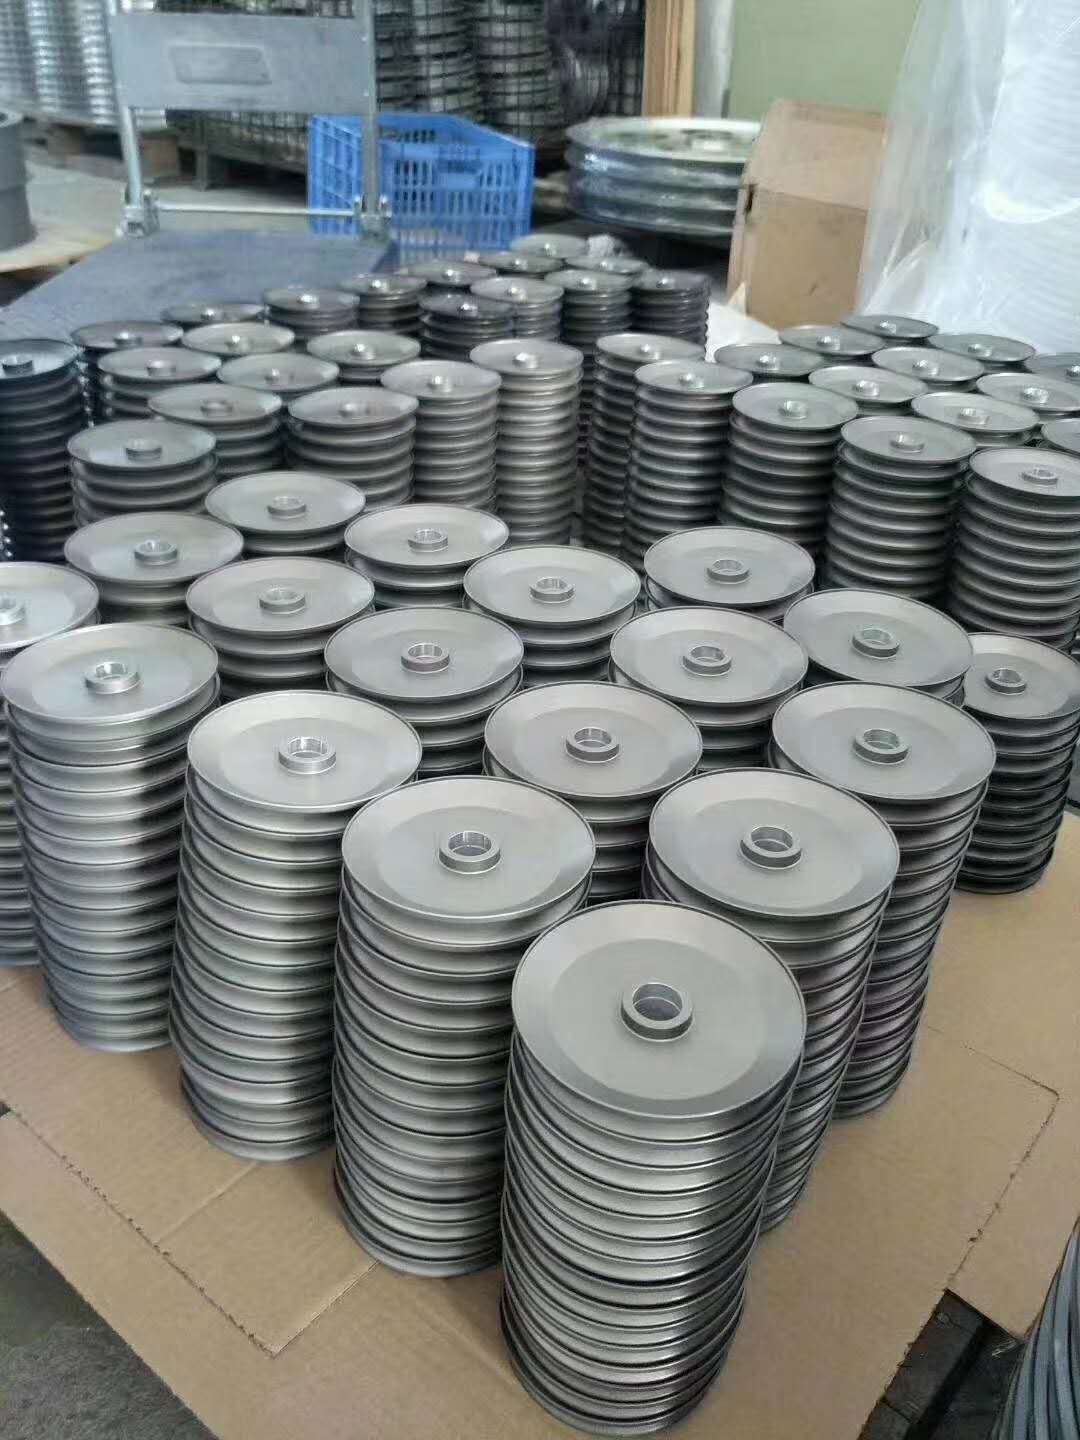 Cable guide wheel order dispatched today